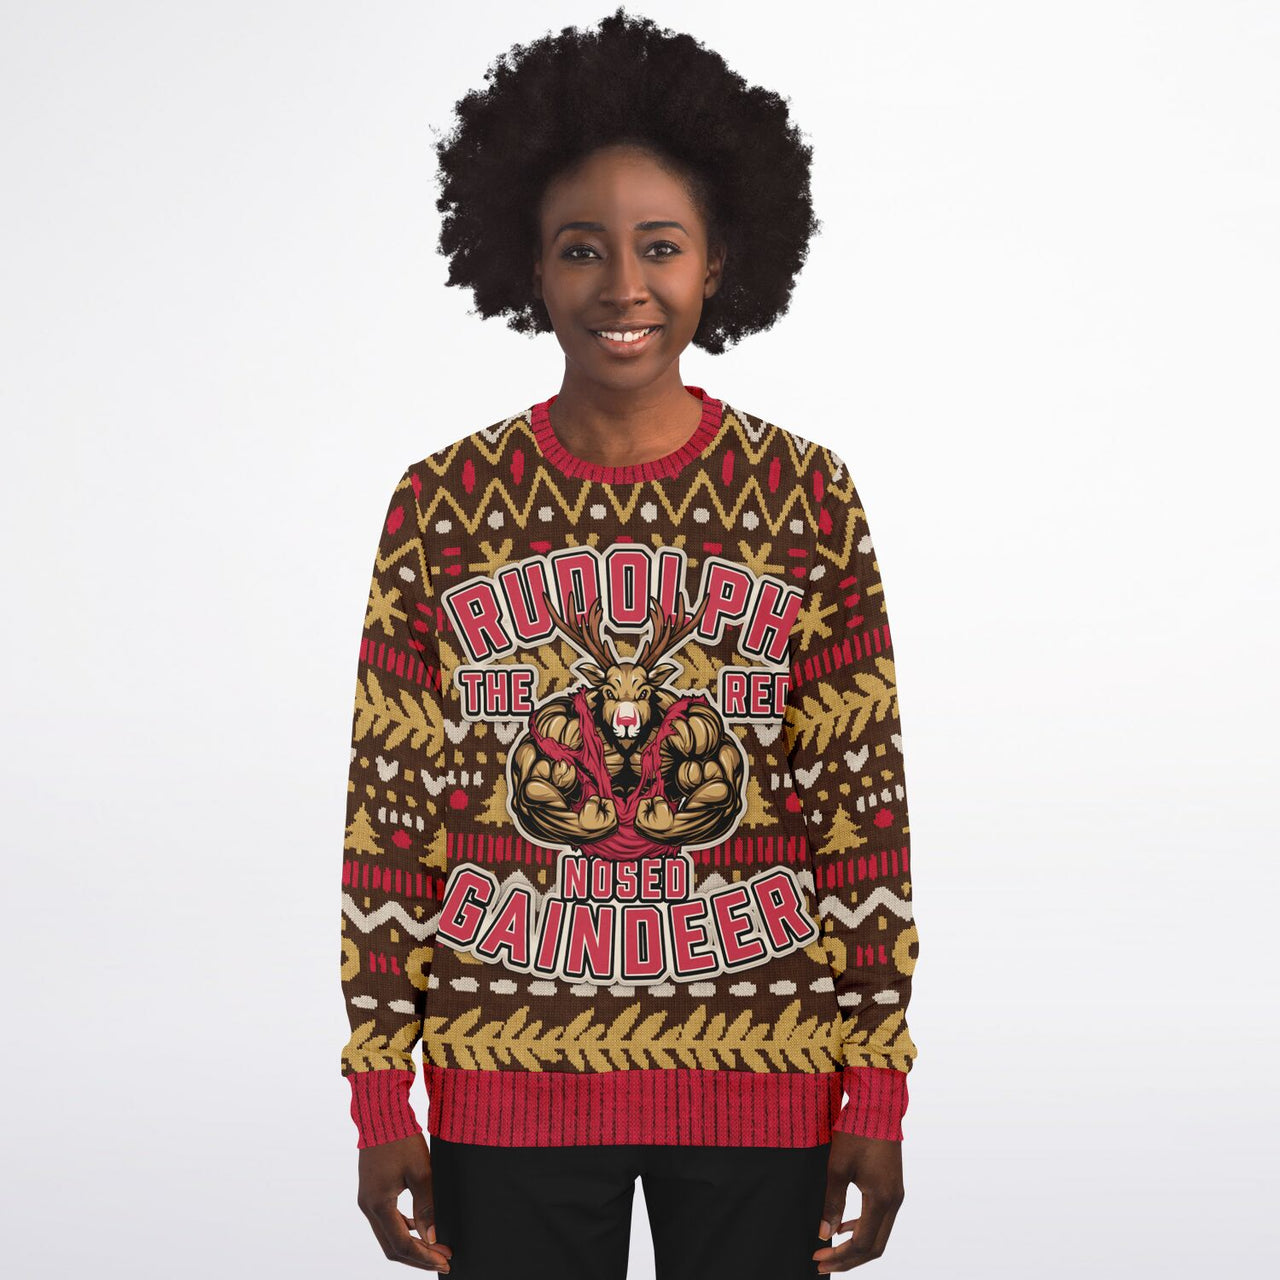 Rudolph the Red Nosed Ugly Christmas Fashion Sweatshirt - Adult AOP